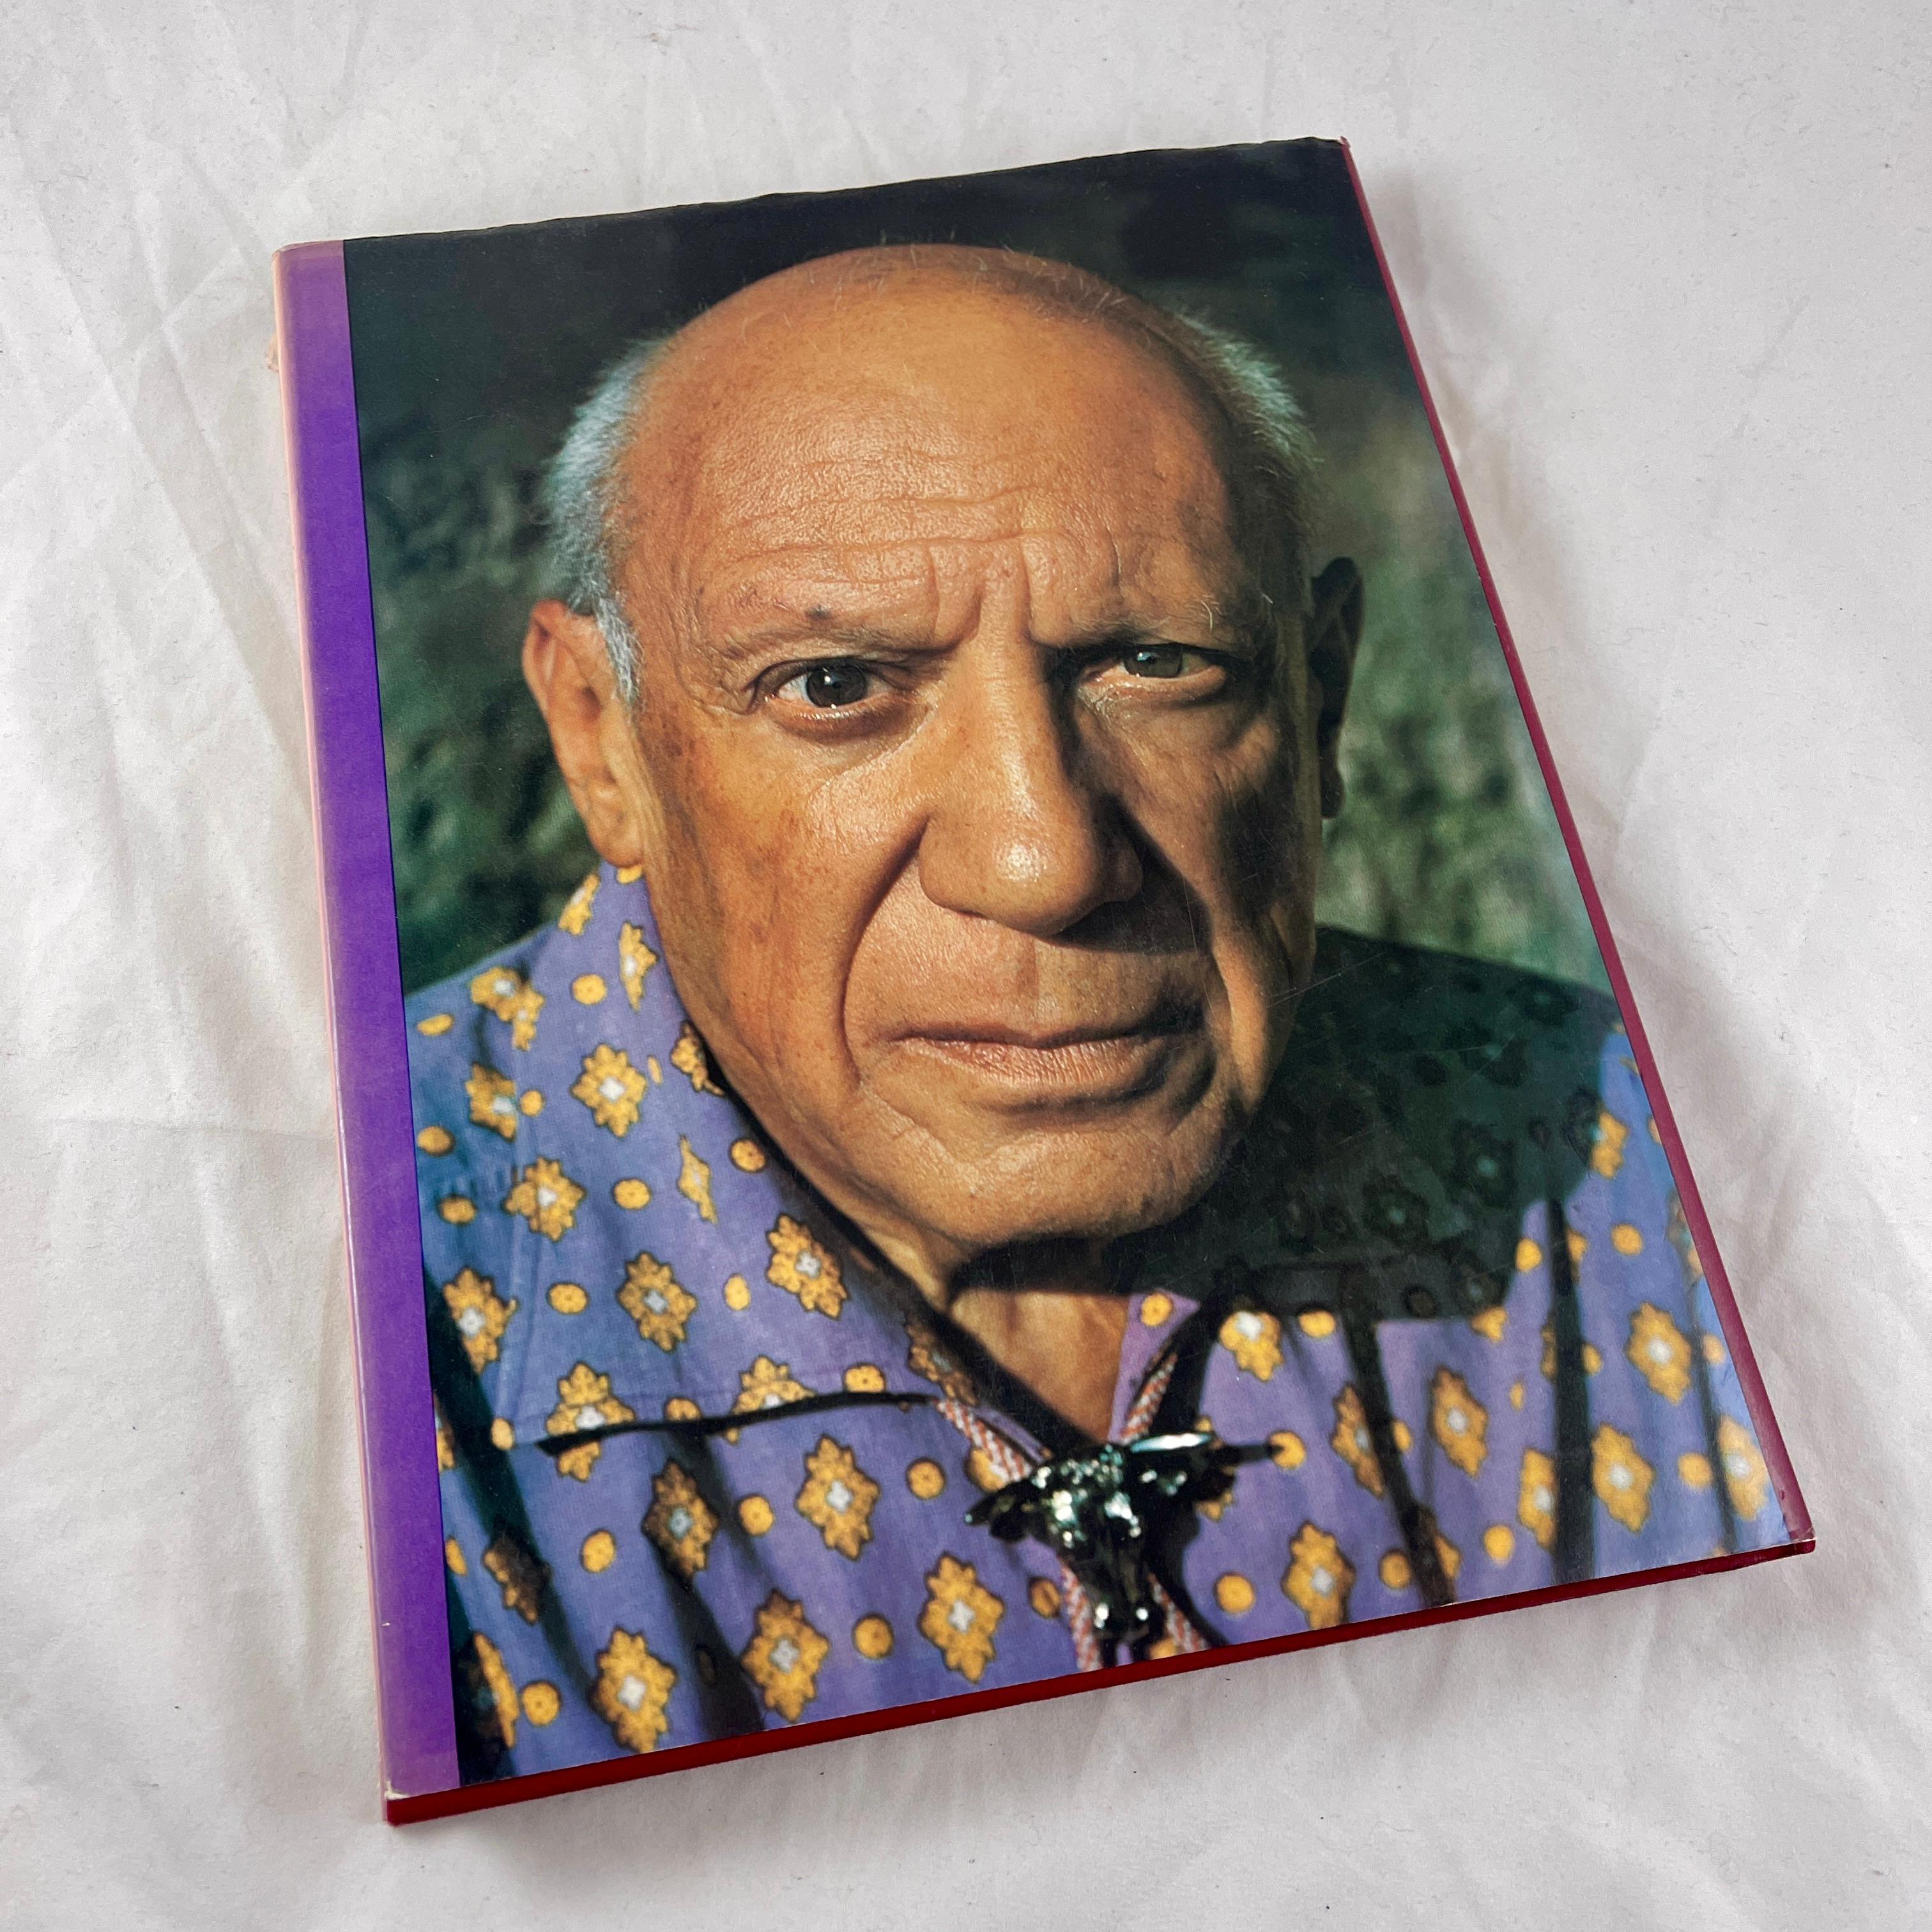 Viva Picasso: a Centennial Celebration 1881-1981
Hardcover – May 1, 1981 – by David Douglas Duncan

A photography book showing Duncan’s photographs of the artist Pablo Picasso in his studio and daily life.

With book jacket.

12 in L x 9 in.